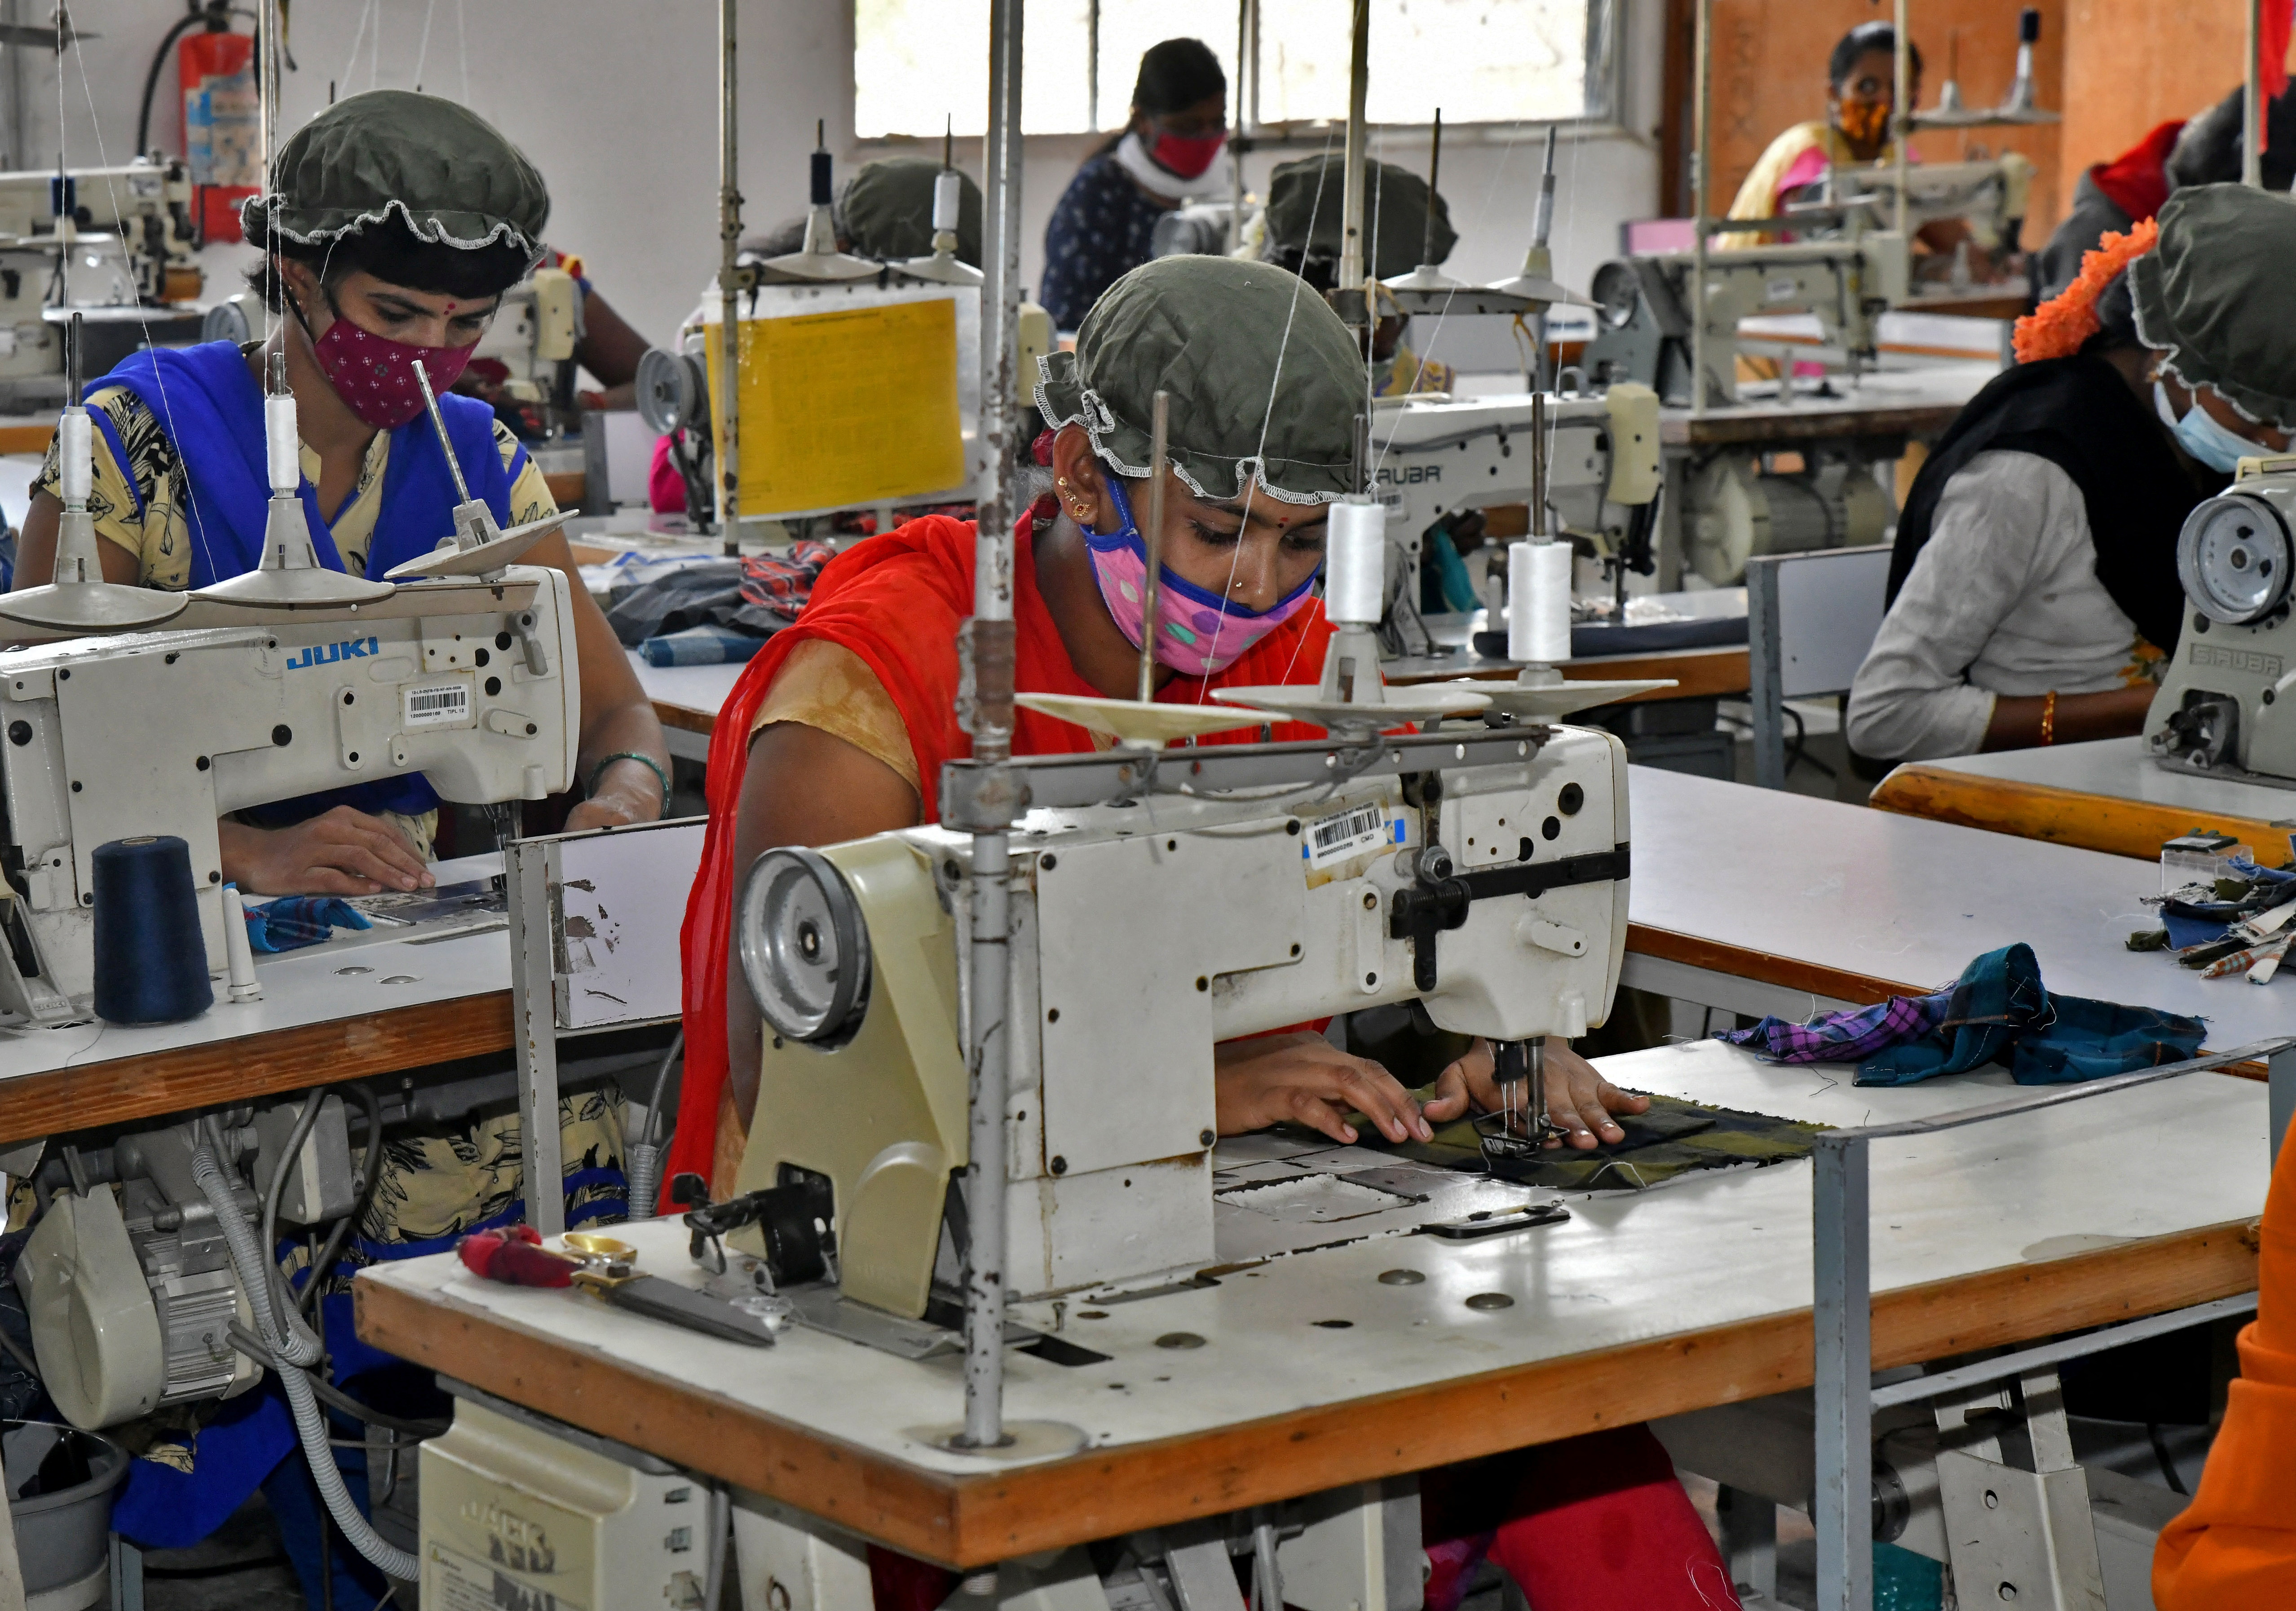 Newly recruited garment workers practice stitching at a textile factory of Texport Industries in Hindupur